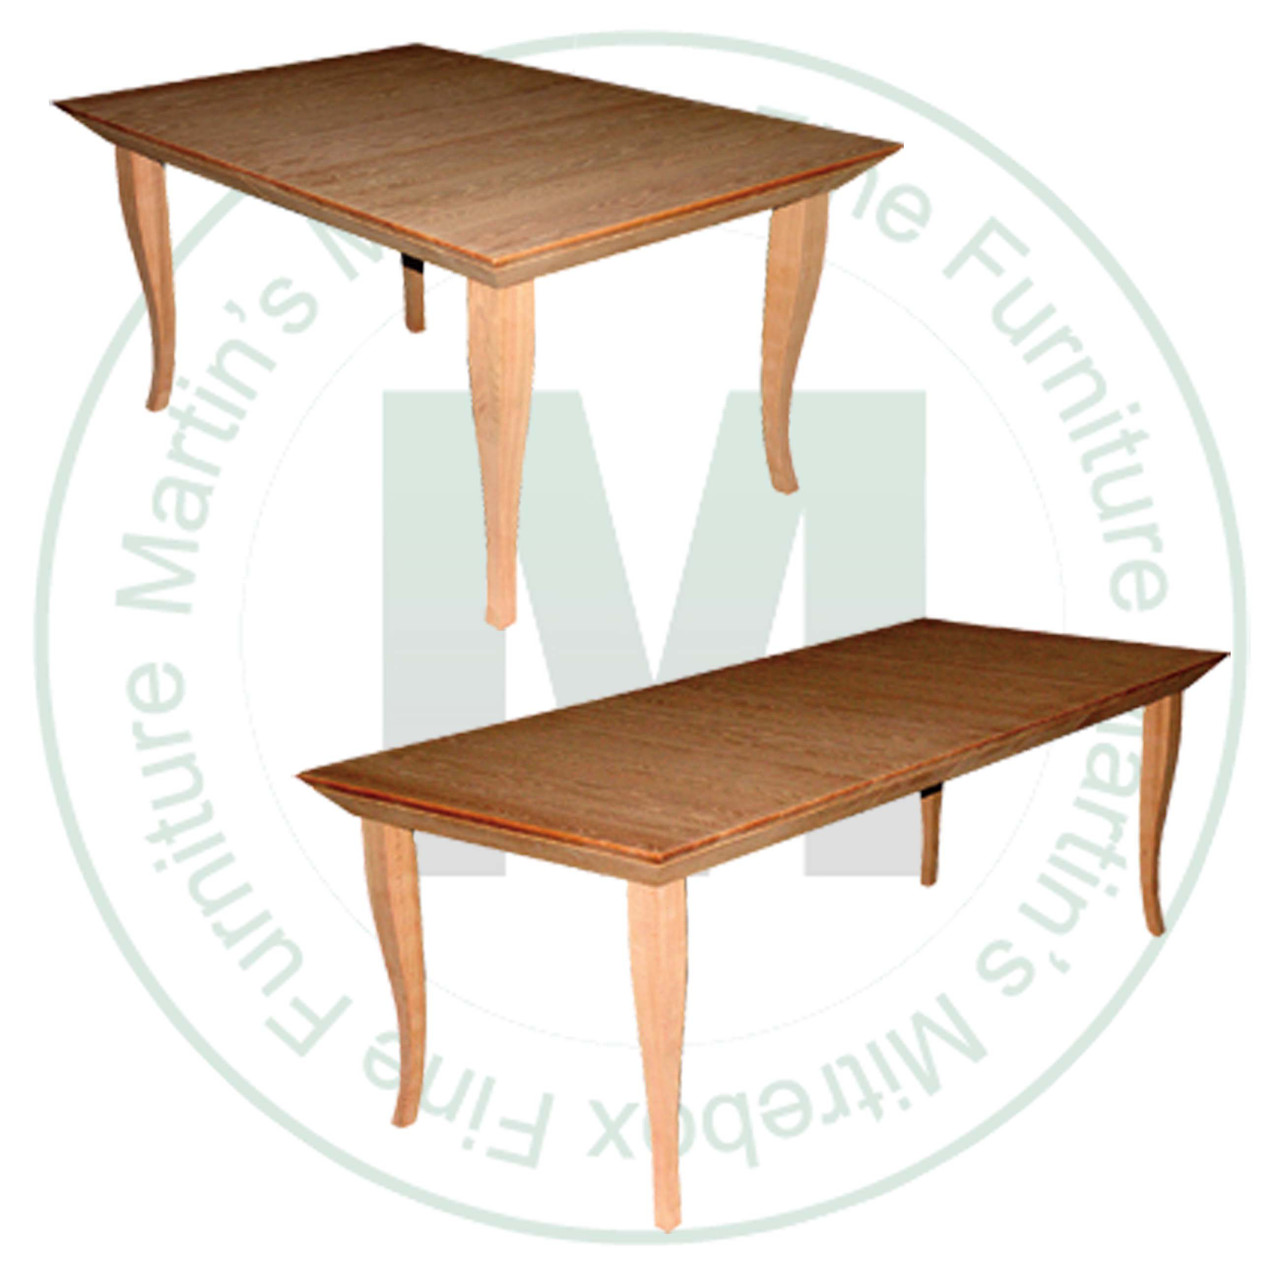 Wormy Maple Bauhaus Extension Harvest Table 42''D x 48''W x 30''H With 3 - 12'' Leaves